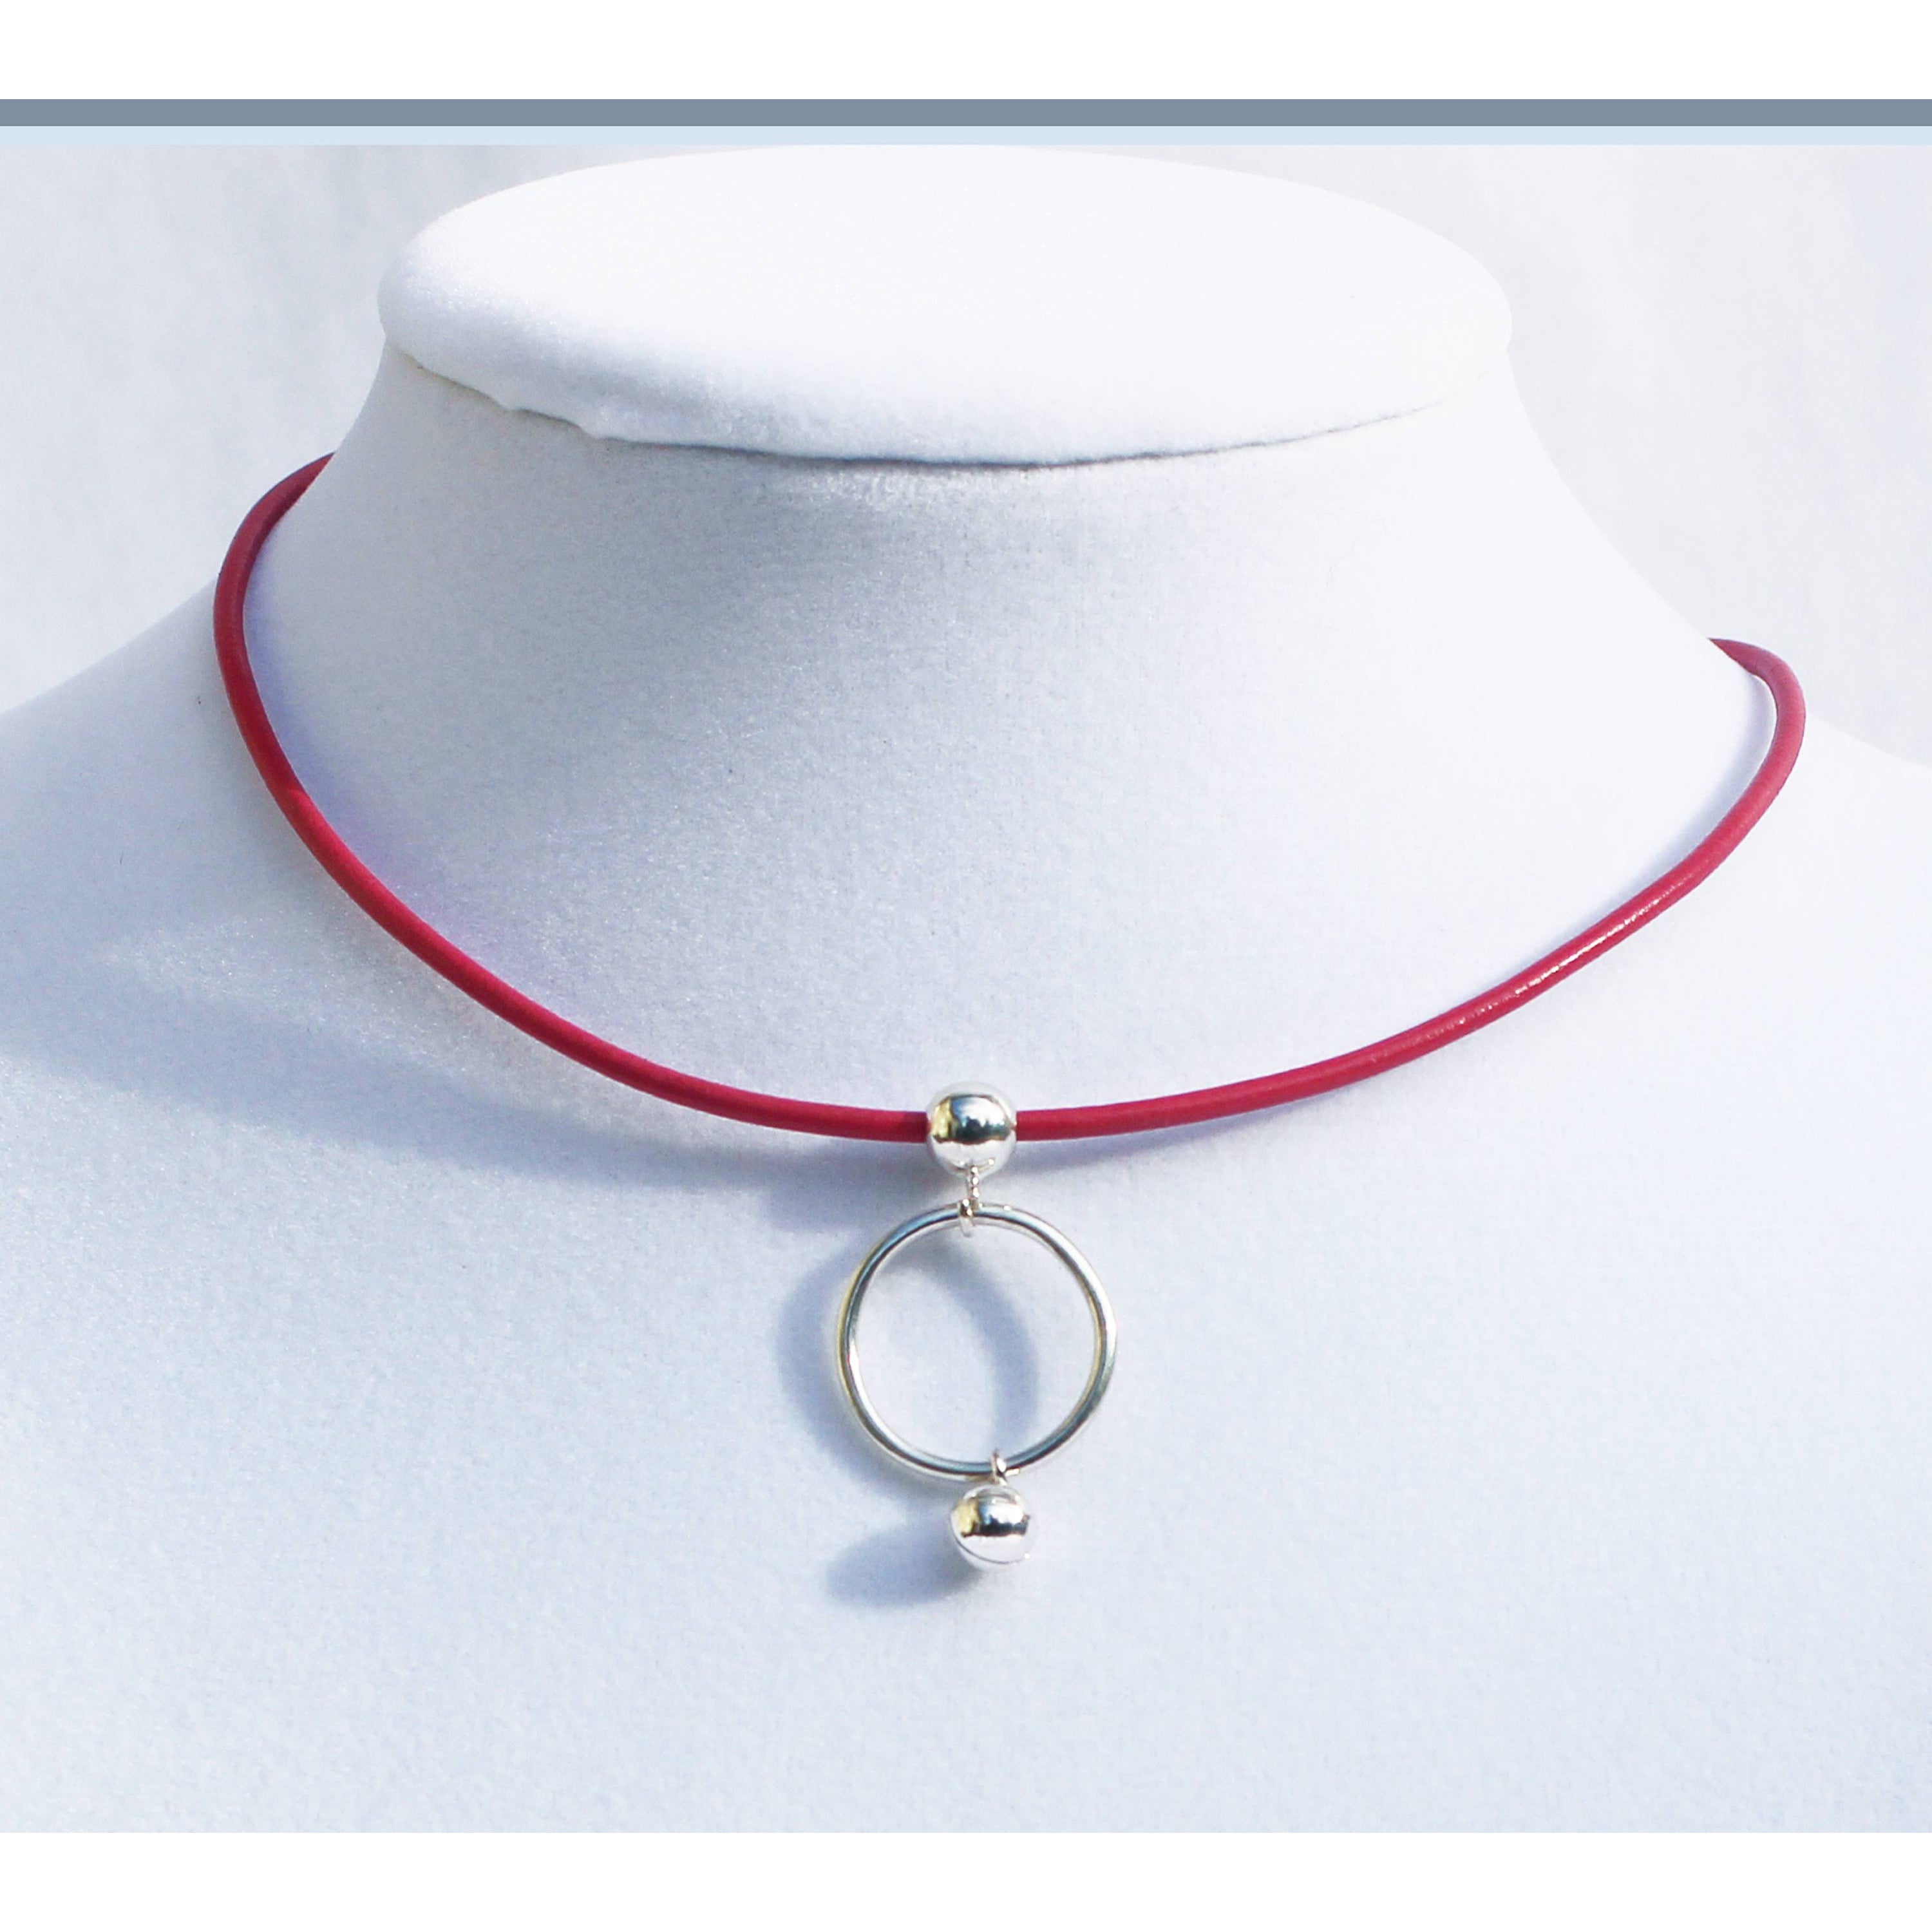 PINK LEATHER & STERLING SILVER KITEN DAY COLLAR, WITH SILVER BELL, SMALL.